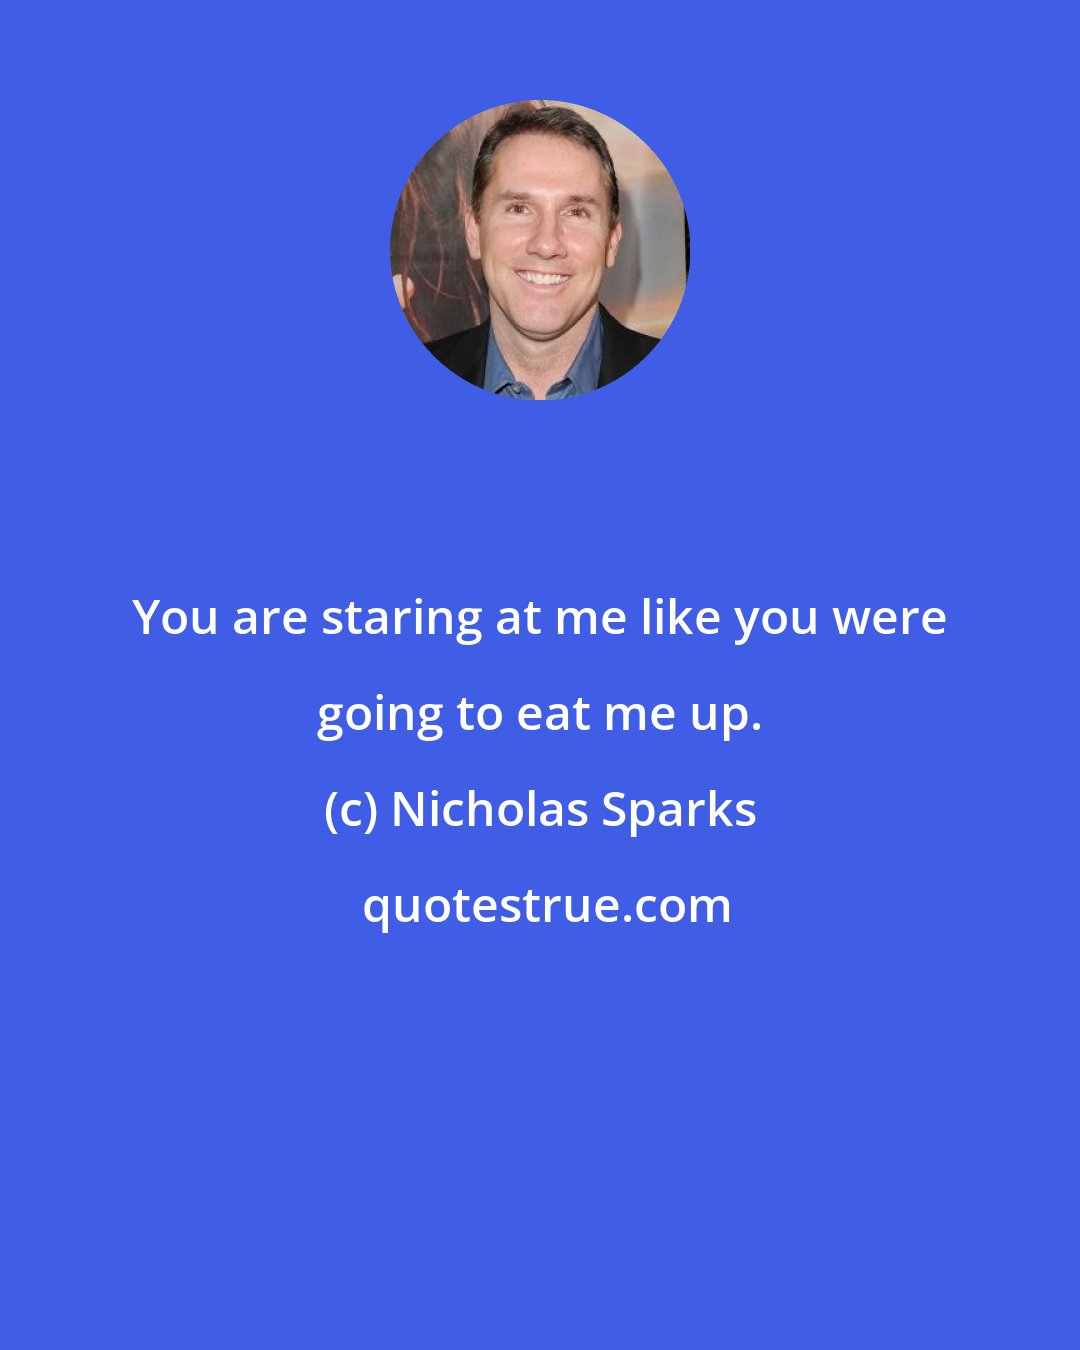 Nicholas Sparks: You are staring at me like you were going to eat me up.